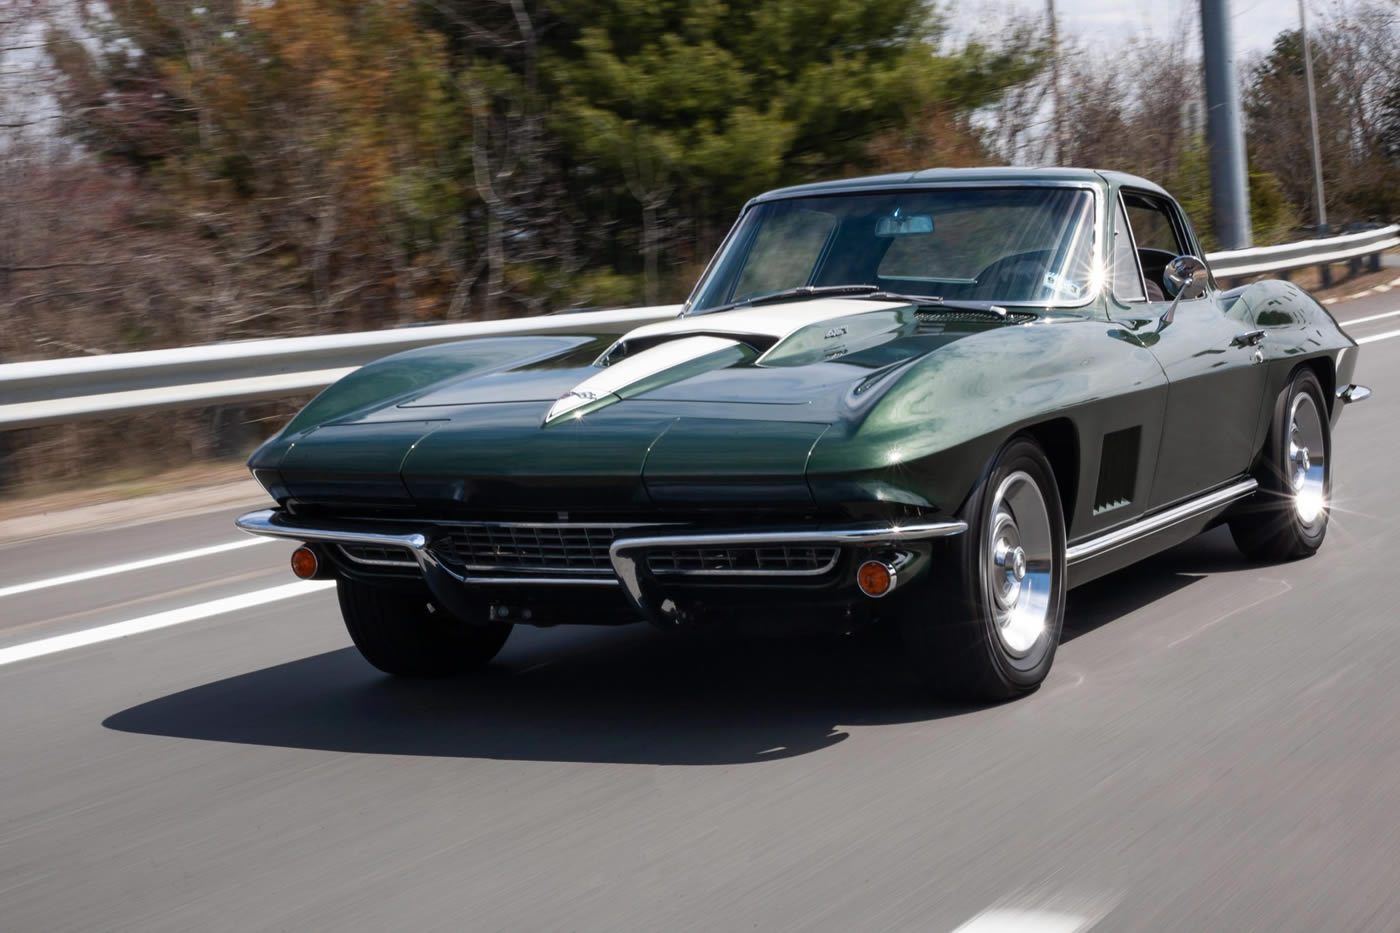 1967 Corvette Coupe in Goodwood Green